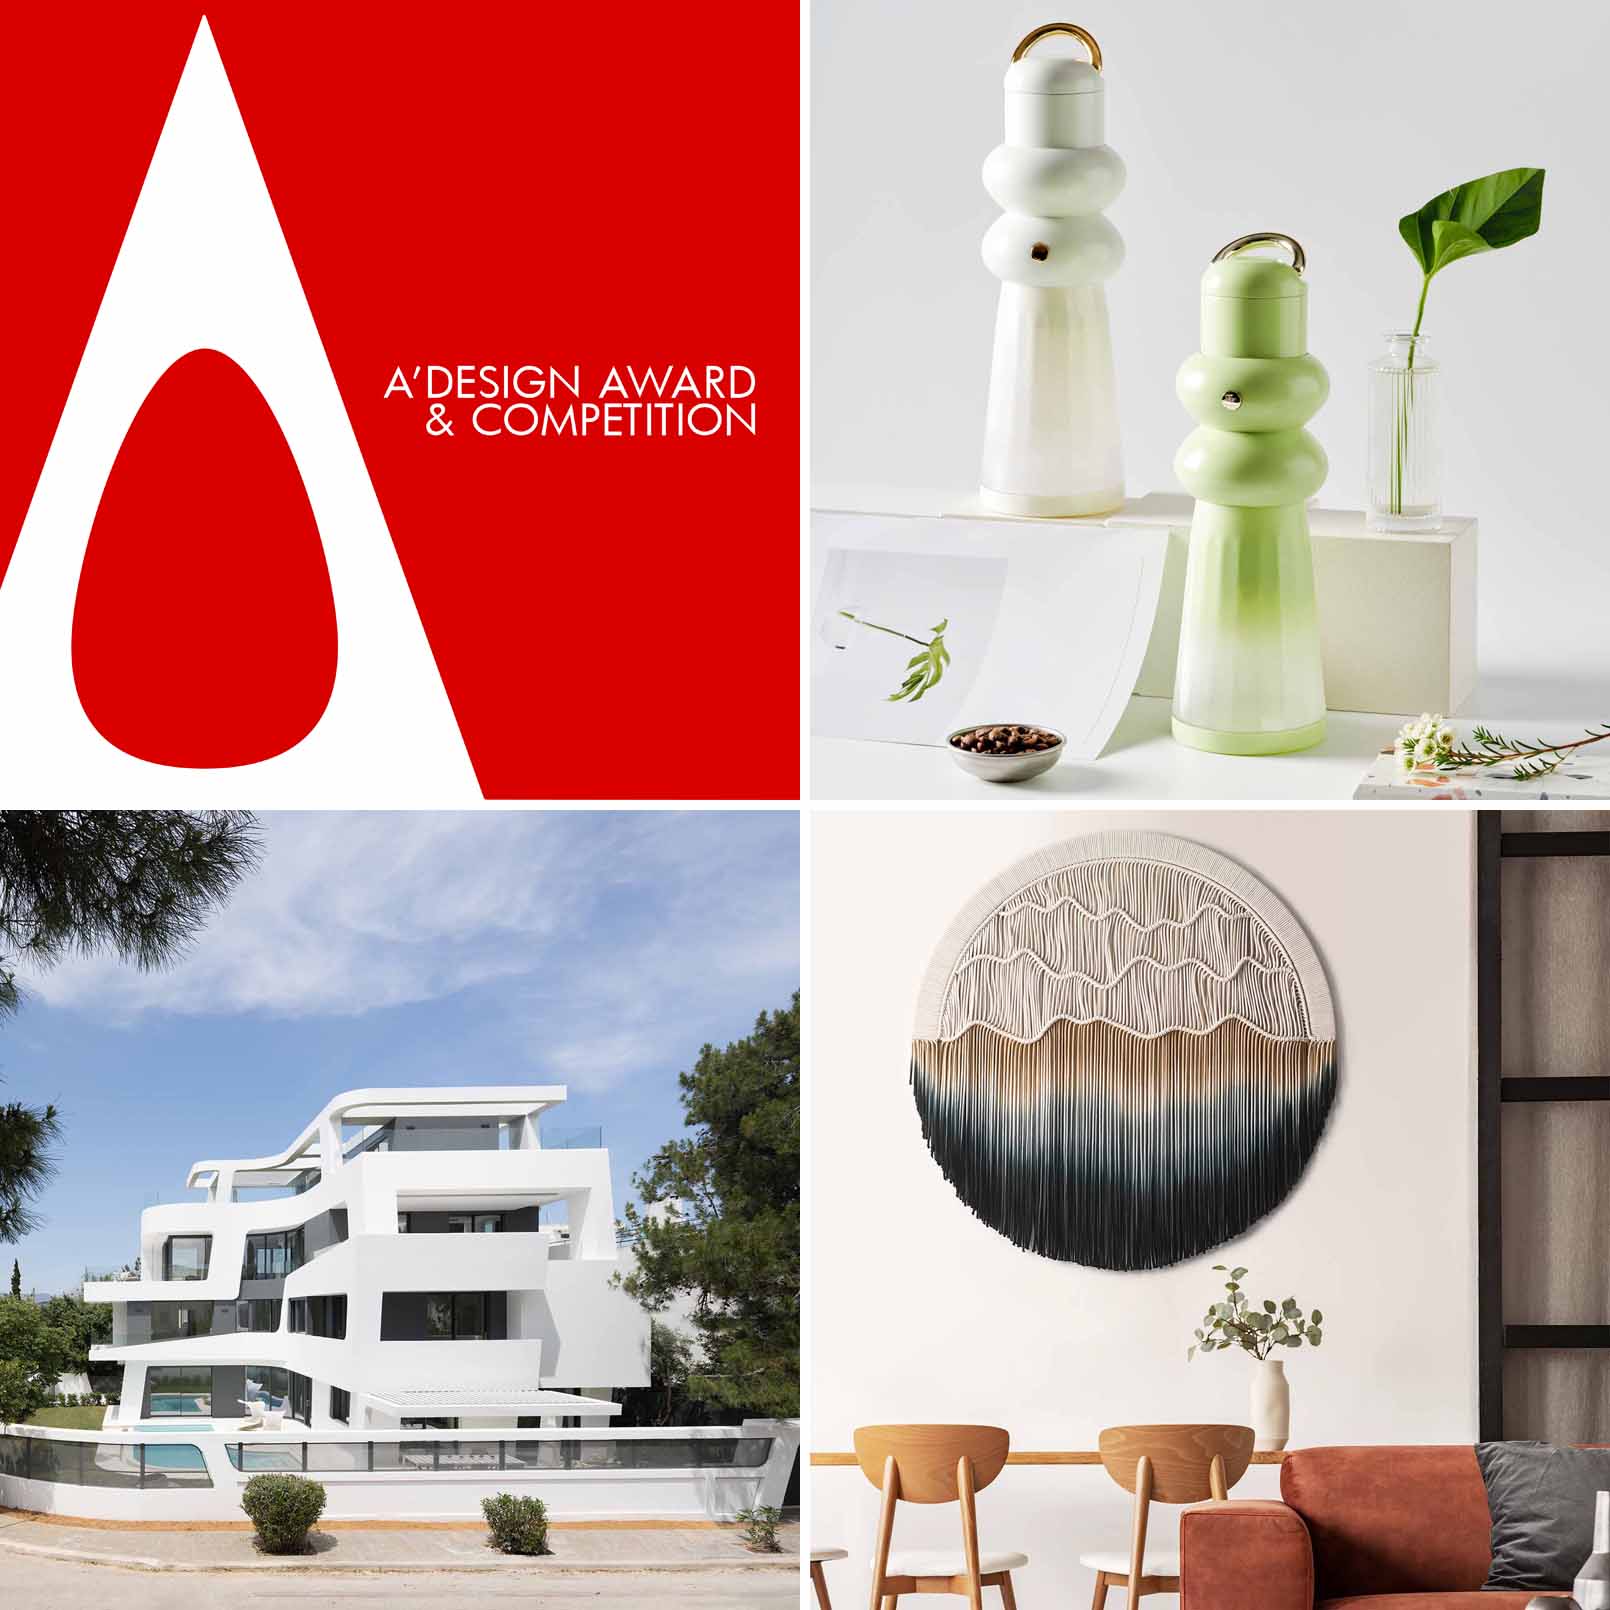 A’ Design Award & Competition showcasing more than 1600 winners in over 150 different design disciplines.